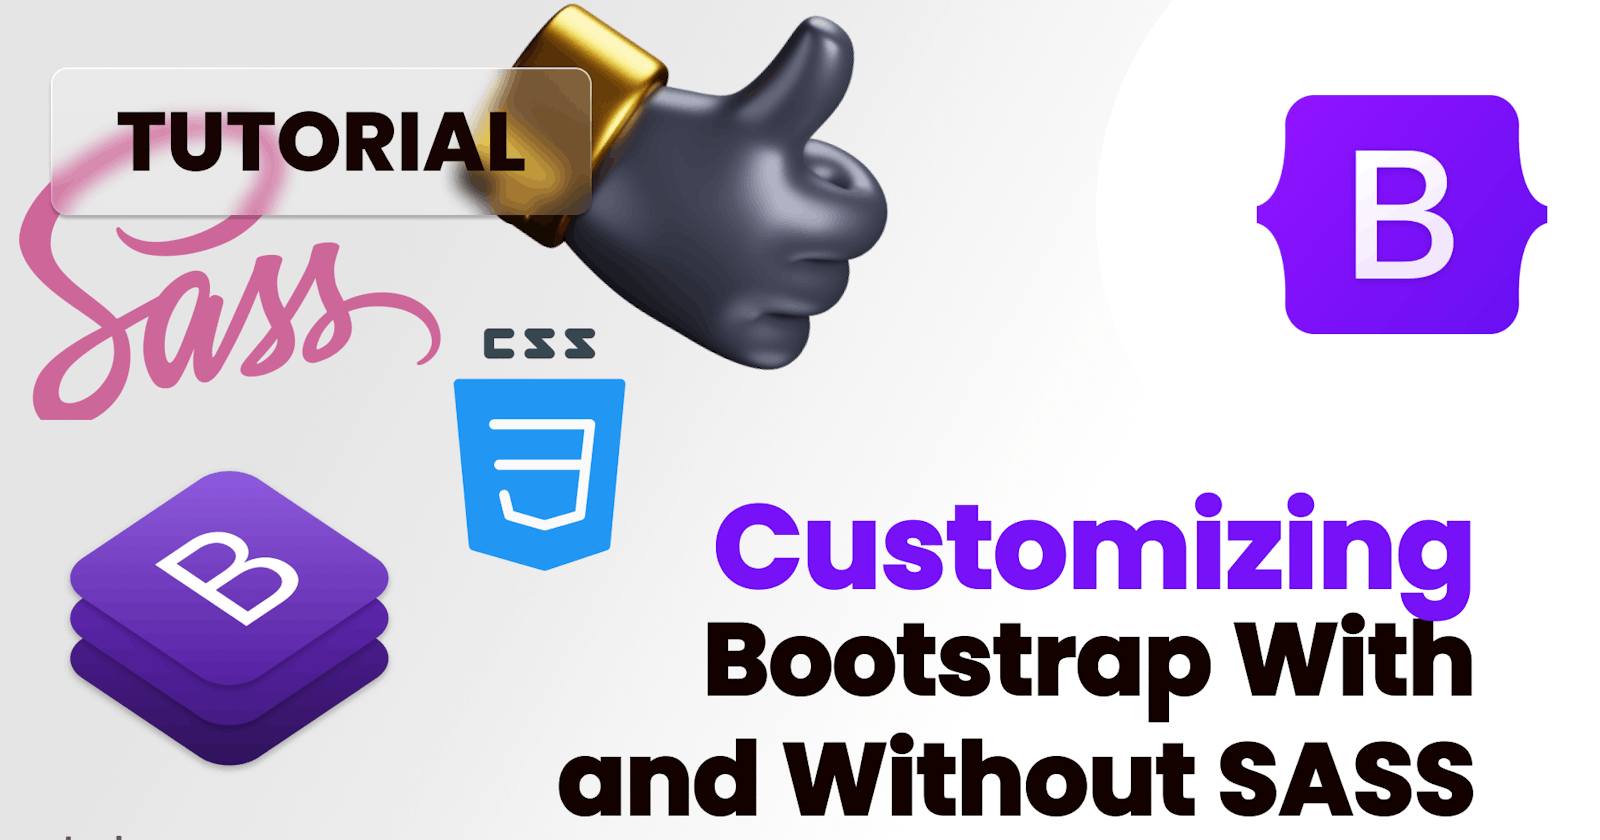 Customizing Bootstrap - 3 Ways to do so. With and without Sass